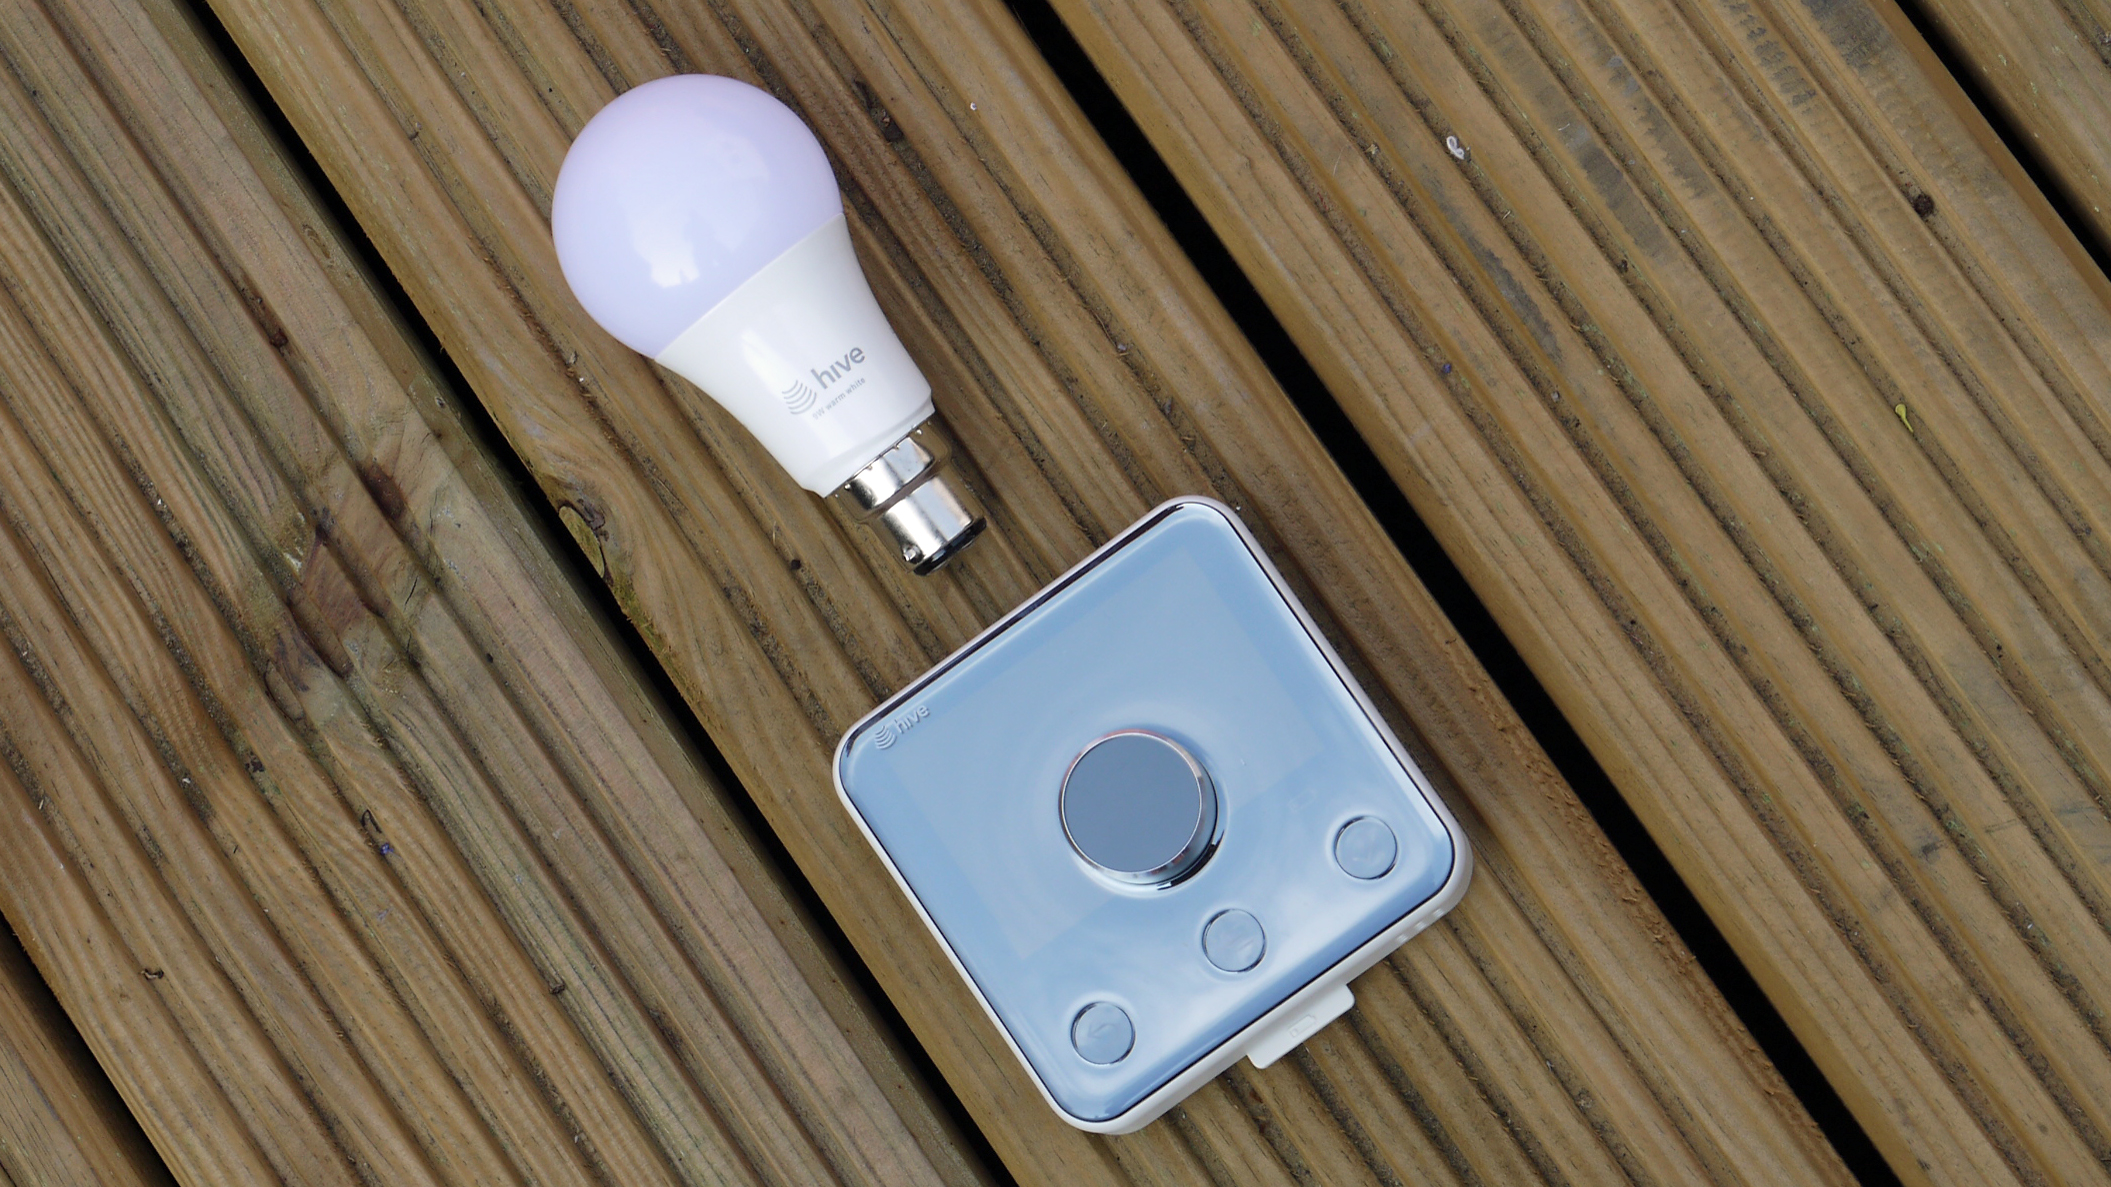 The Hive Thermostat on wooden decking with a Hive smart light bulb above it